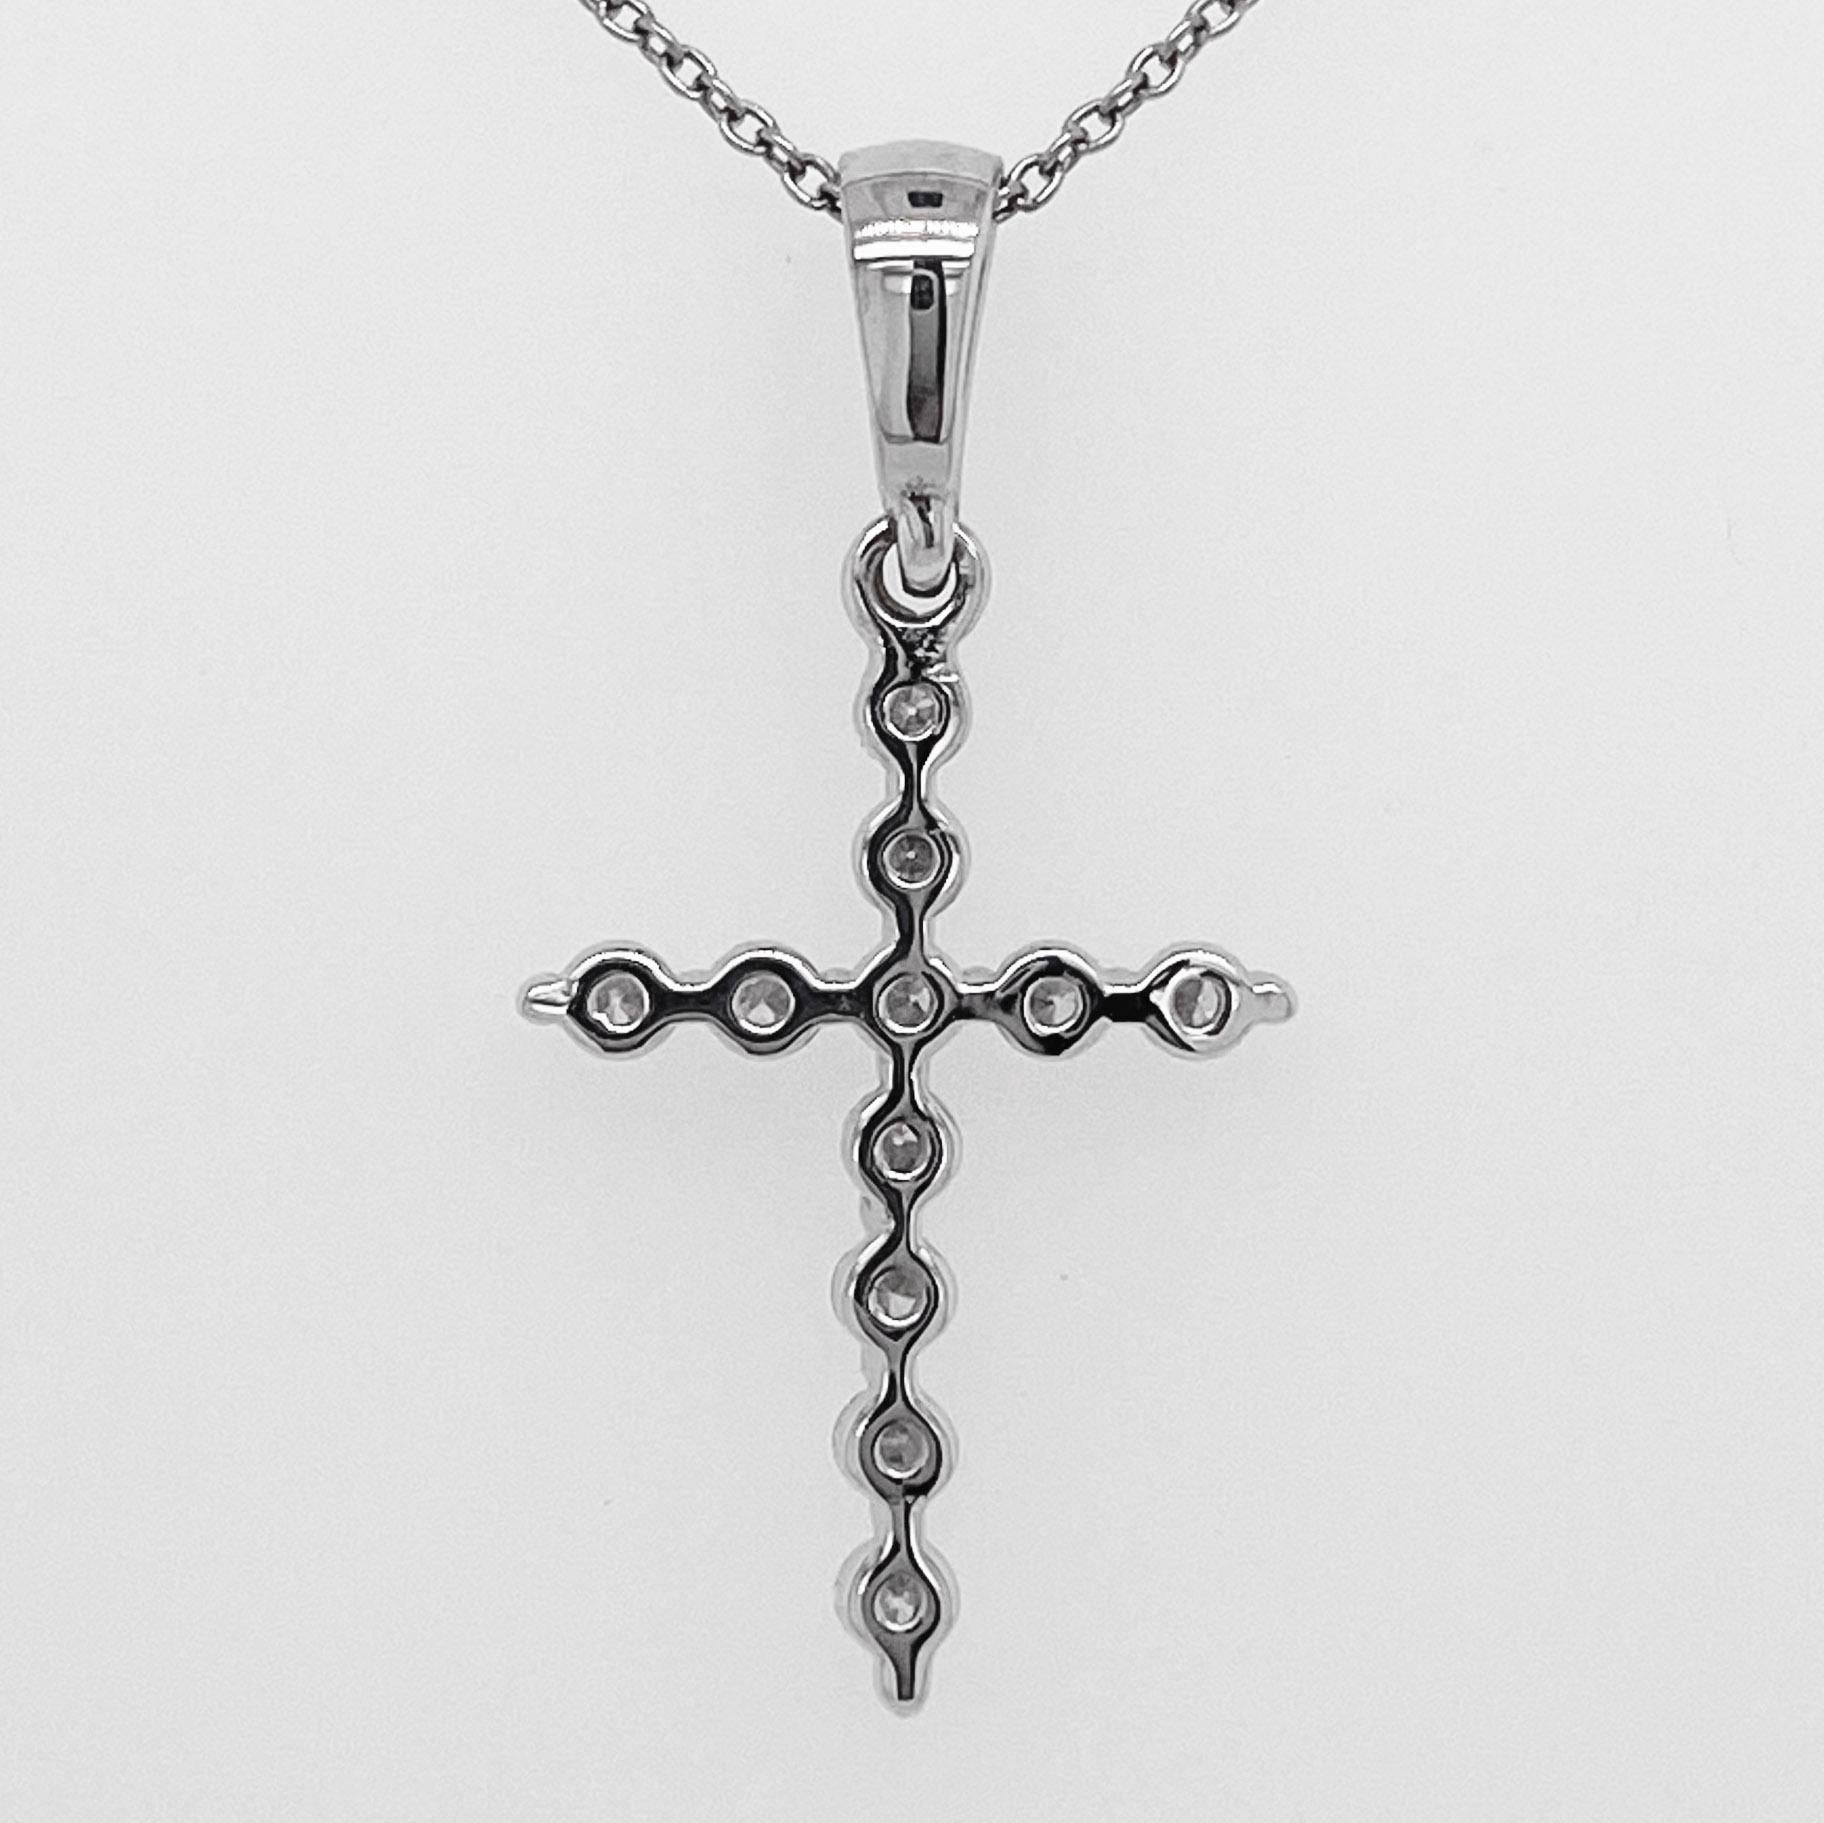 Round Cut Diamond Cross Necklace, White Gold Diamond Cross Pendant and Chain For Sale